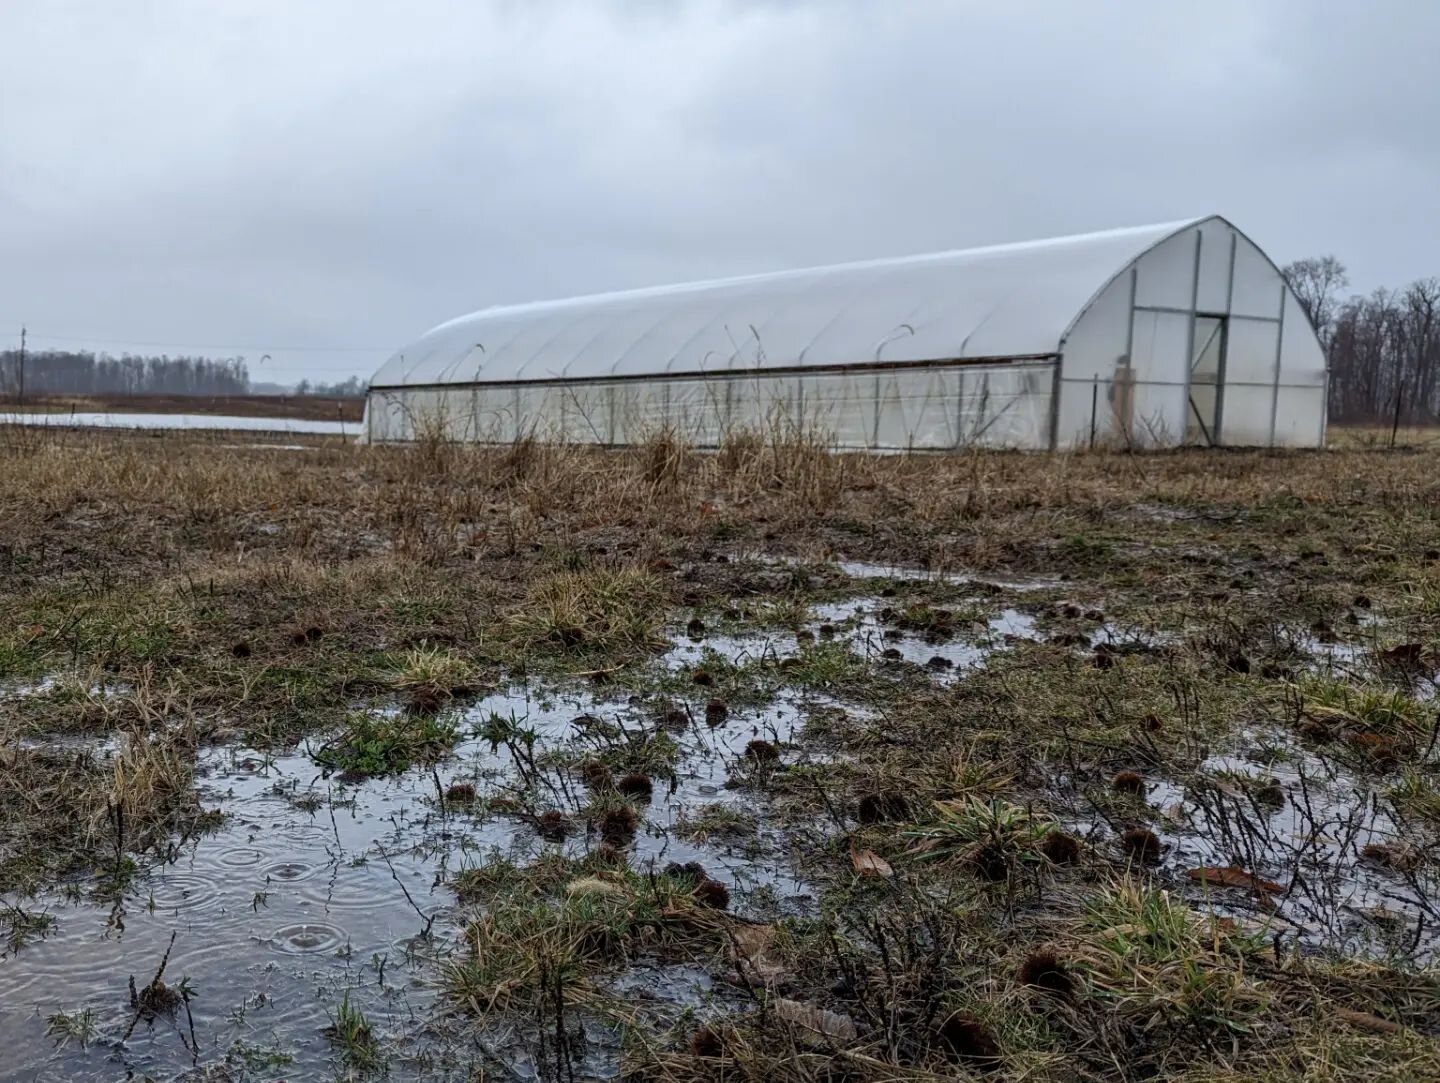 ☔ This is more characteristic of early March: frigid, unrelenting rains.  These conditions are  a major reason why we don't jump the gun on getting into the field.  It seems this heartland soil needs a good spring marination every year before it's re